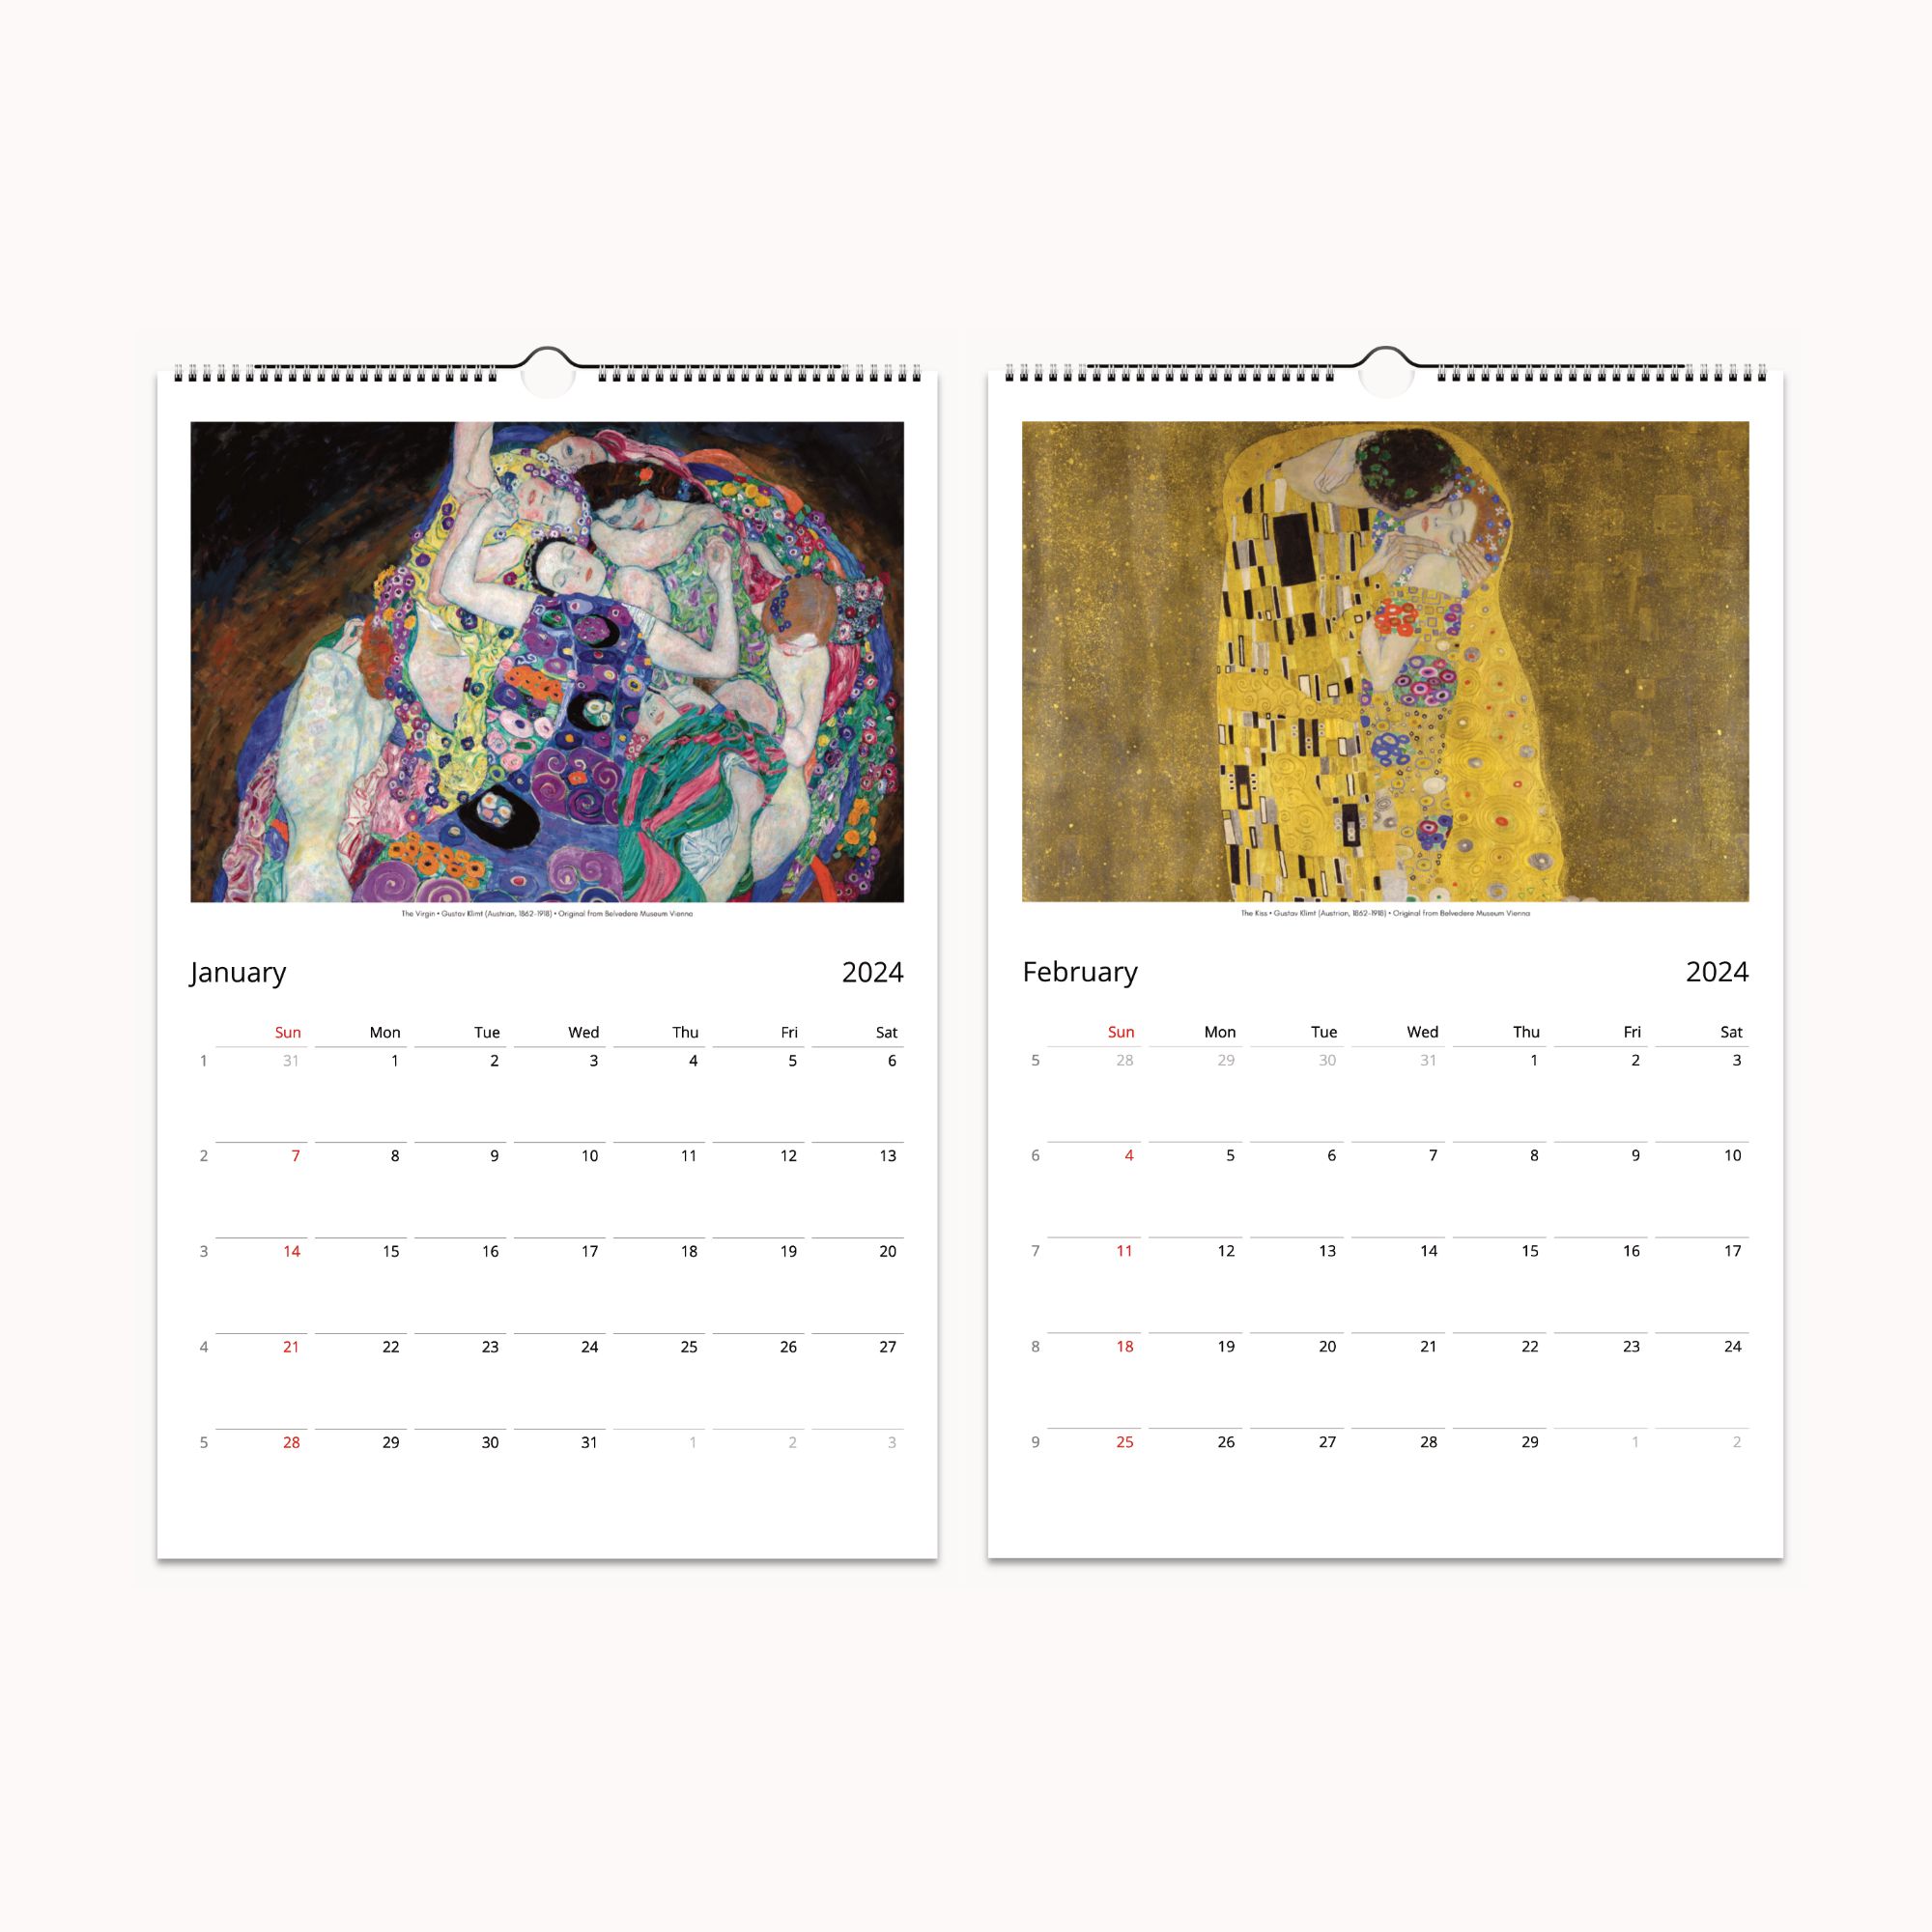 2024 Wall Calendar with Gustav Klimt's masterpieces, providing monthly artistic inspiration and space for personal notes, with collectible prints suitable for framing.